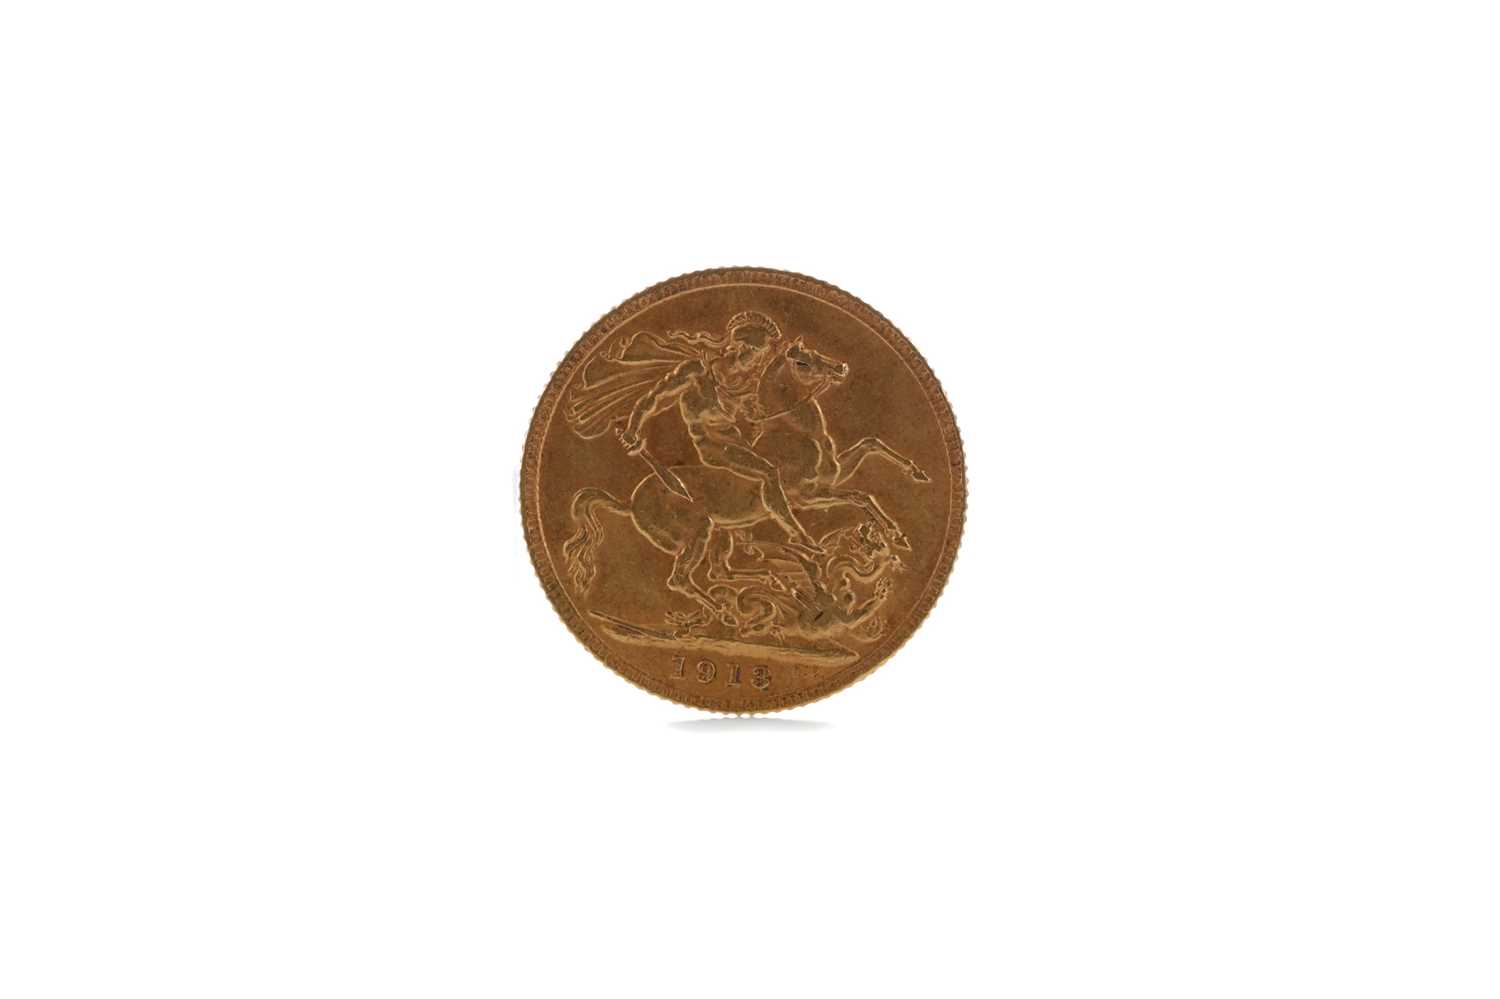 Lot 34 - A GOLD SOVEREIGN DATED 1913